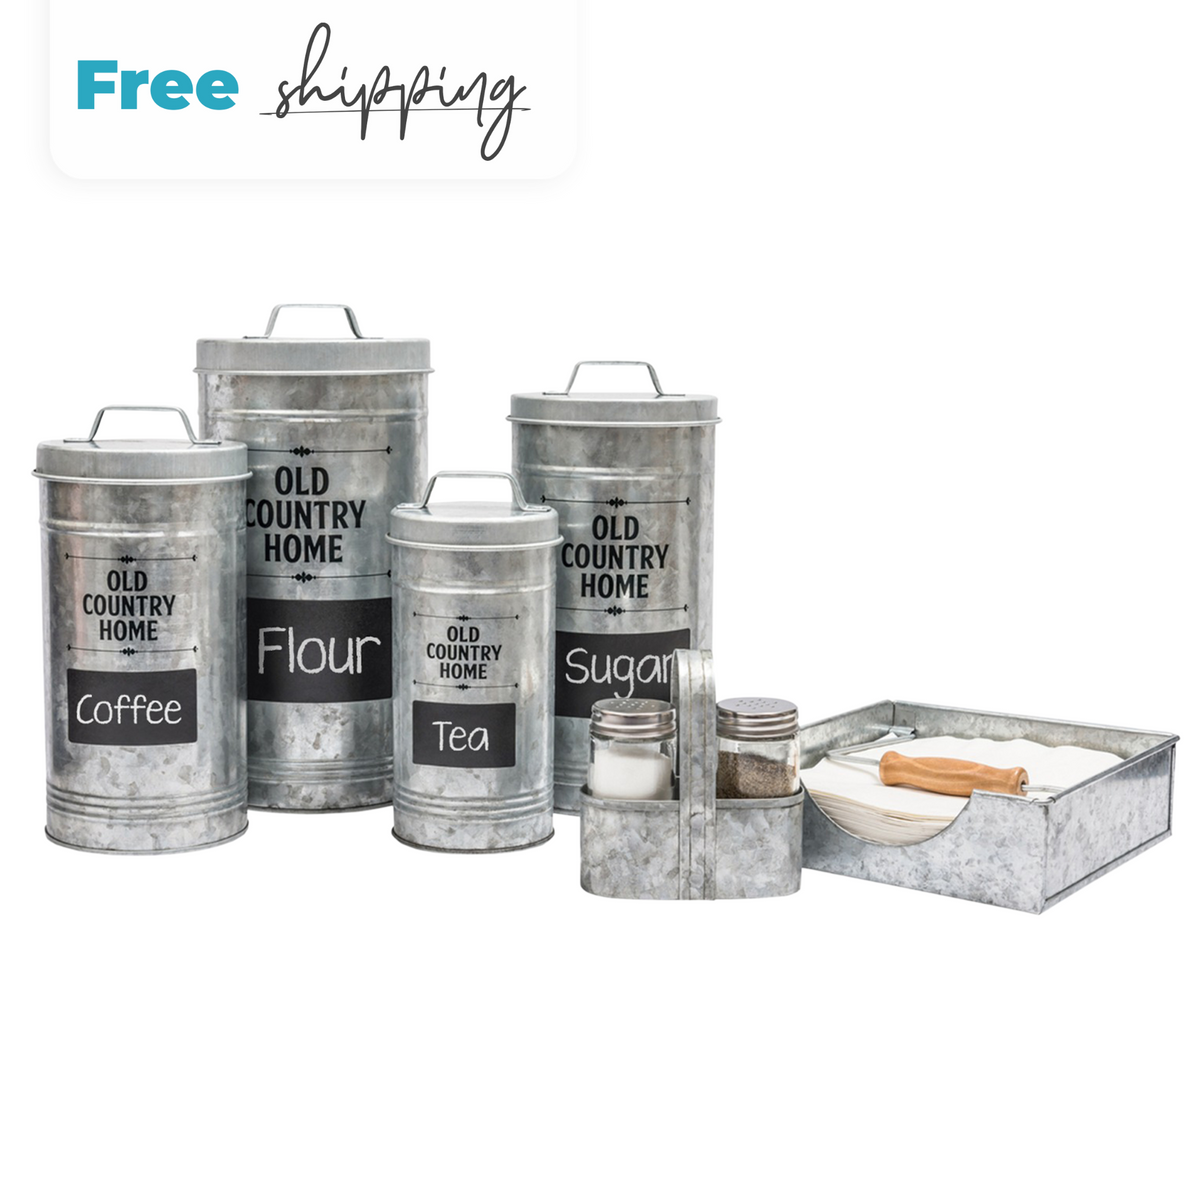 Farmhouse Kitchen Decor Trio Set by Saratoga Home - Salt &amp; Pepper Shakers With Caddy Set, Napkin Holder and Set of 4 Canisters with Labels &amp; Marker